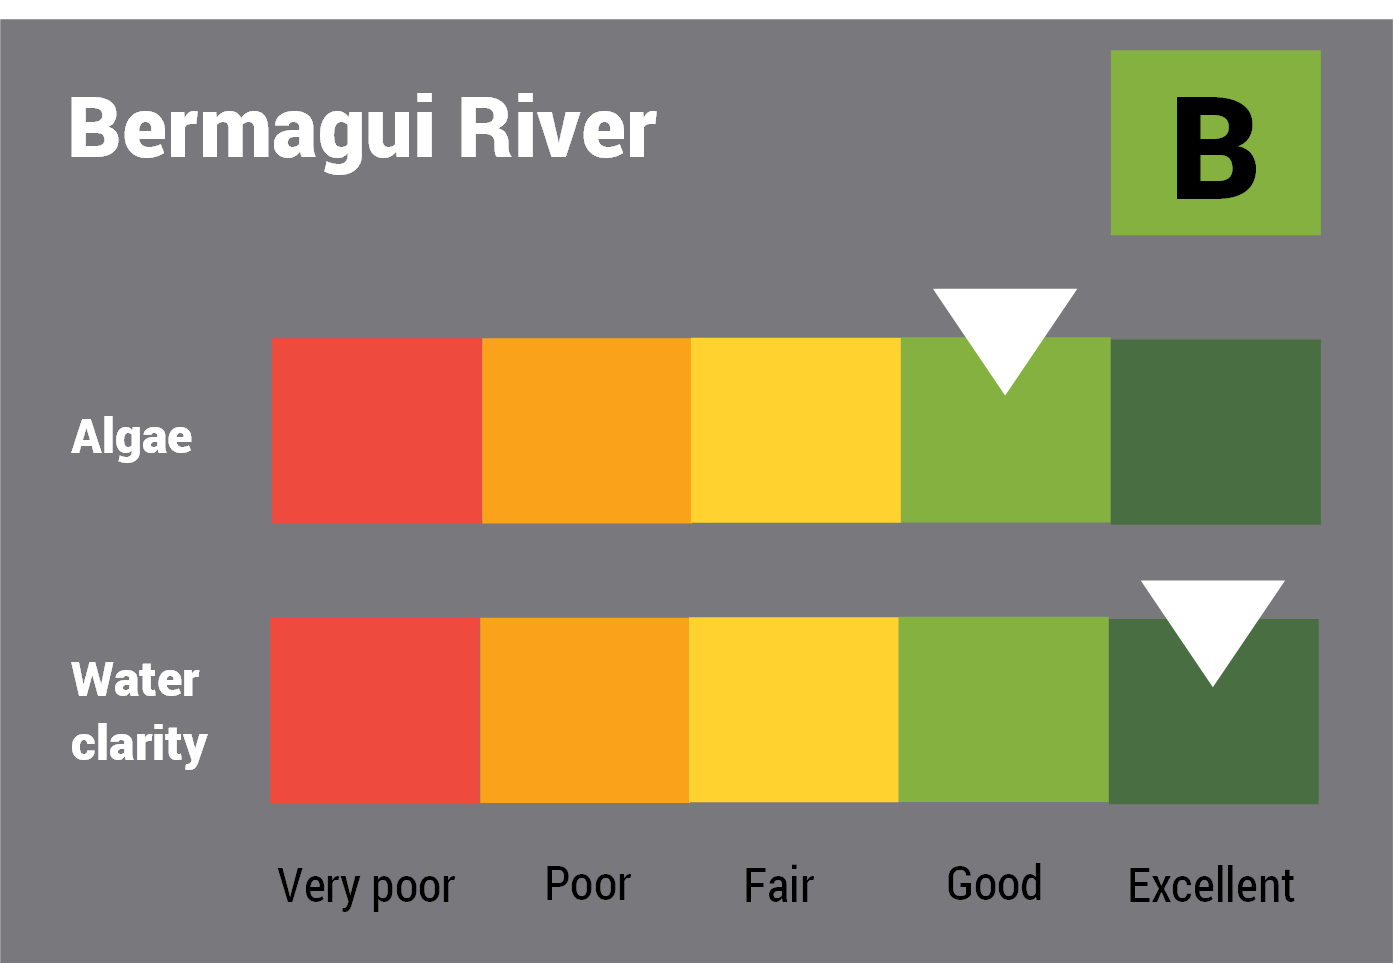 Bermagui River water quality report card for algae and water clarity showing colour-coded ratings (red, orange, yellow, light green and dark green, which represent very poor, poor, fair, good and excellent, respectively). Algae is rated 'fair' and water clarity is rated 'excellent' giving an overall rating of 'good' or 'B'.